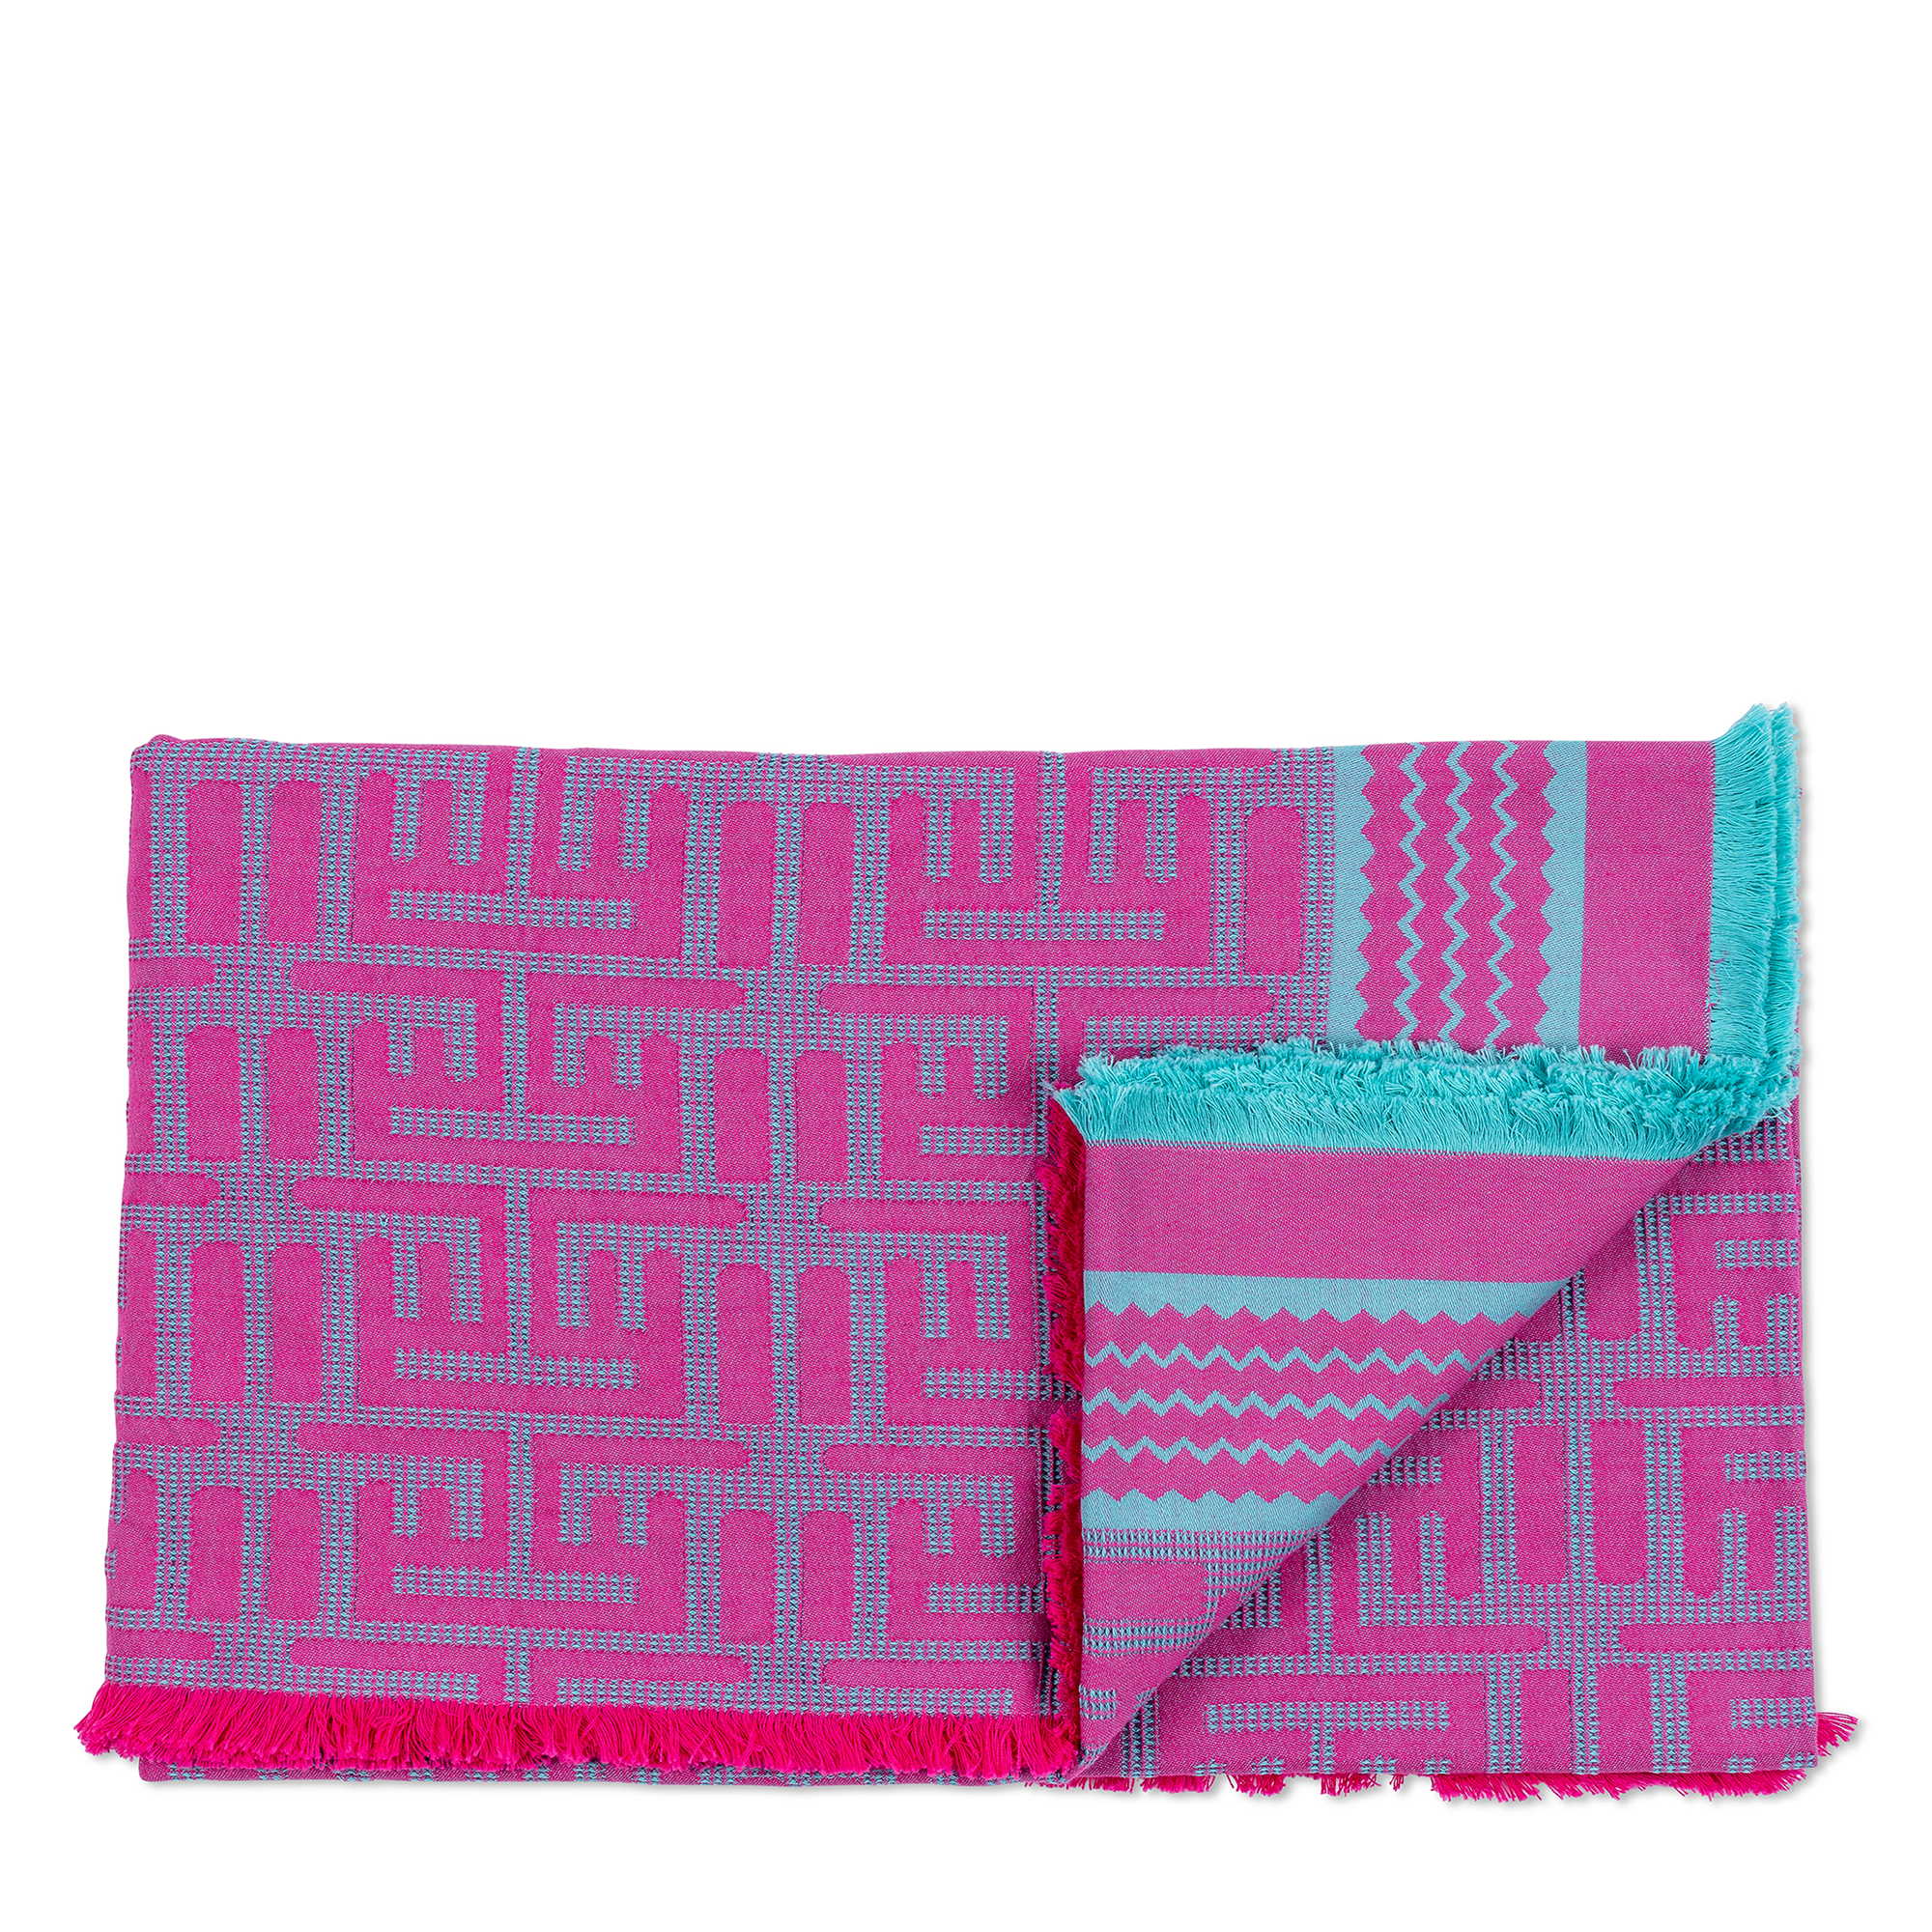 This pink and turquoise beach mat with a geometric pattern, featuring 100% cotton fabric is lightweight and portable, ideal for beach outings and picnics.